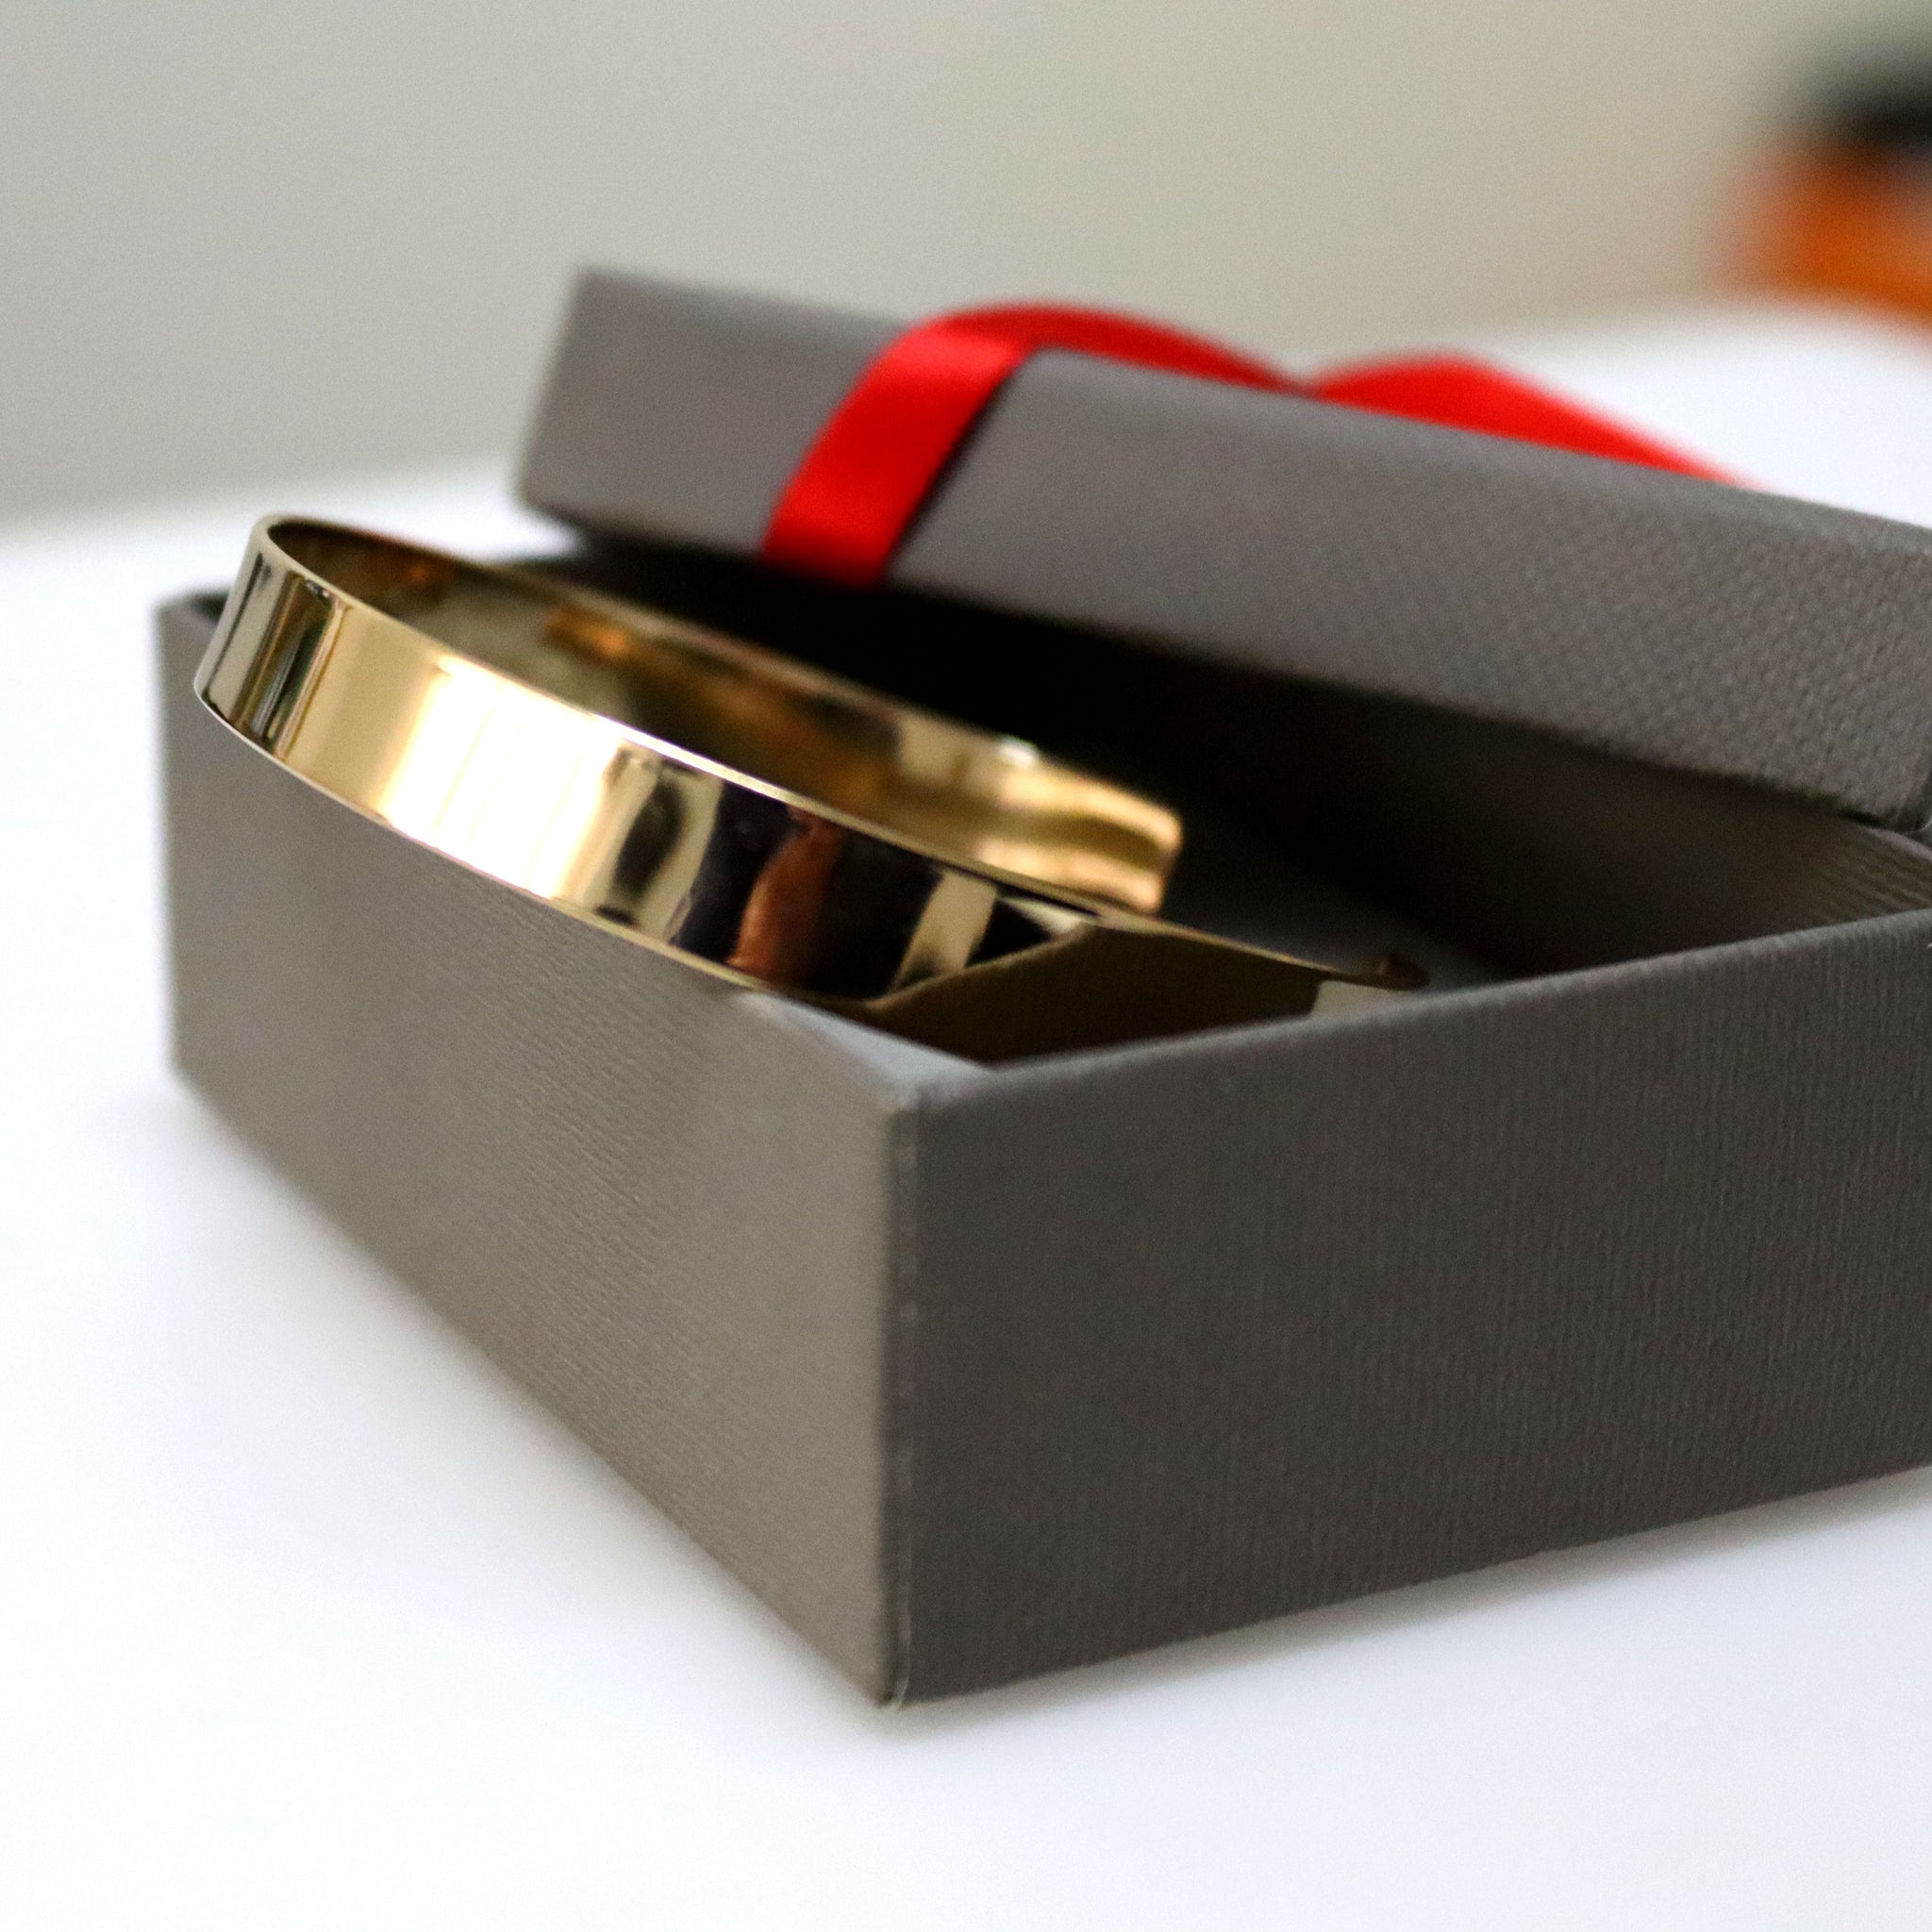 Gold Cuff Bracelet, Anniversary Gift for Husband, Fiance Gift for Him Inside Engraving